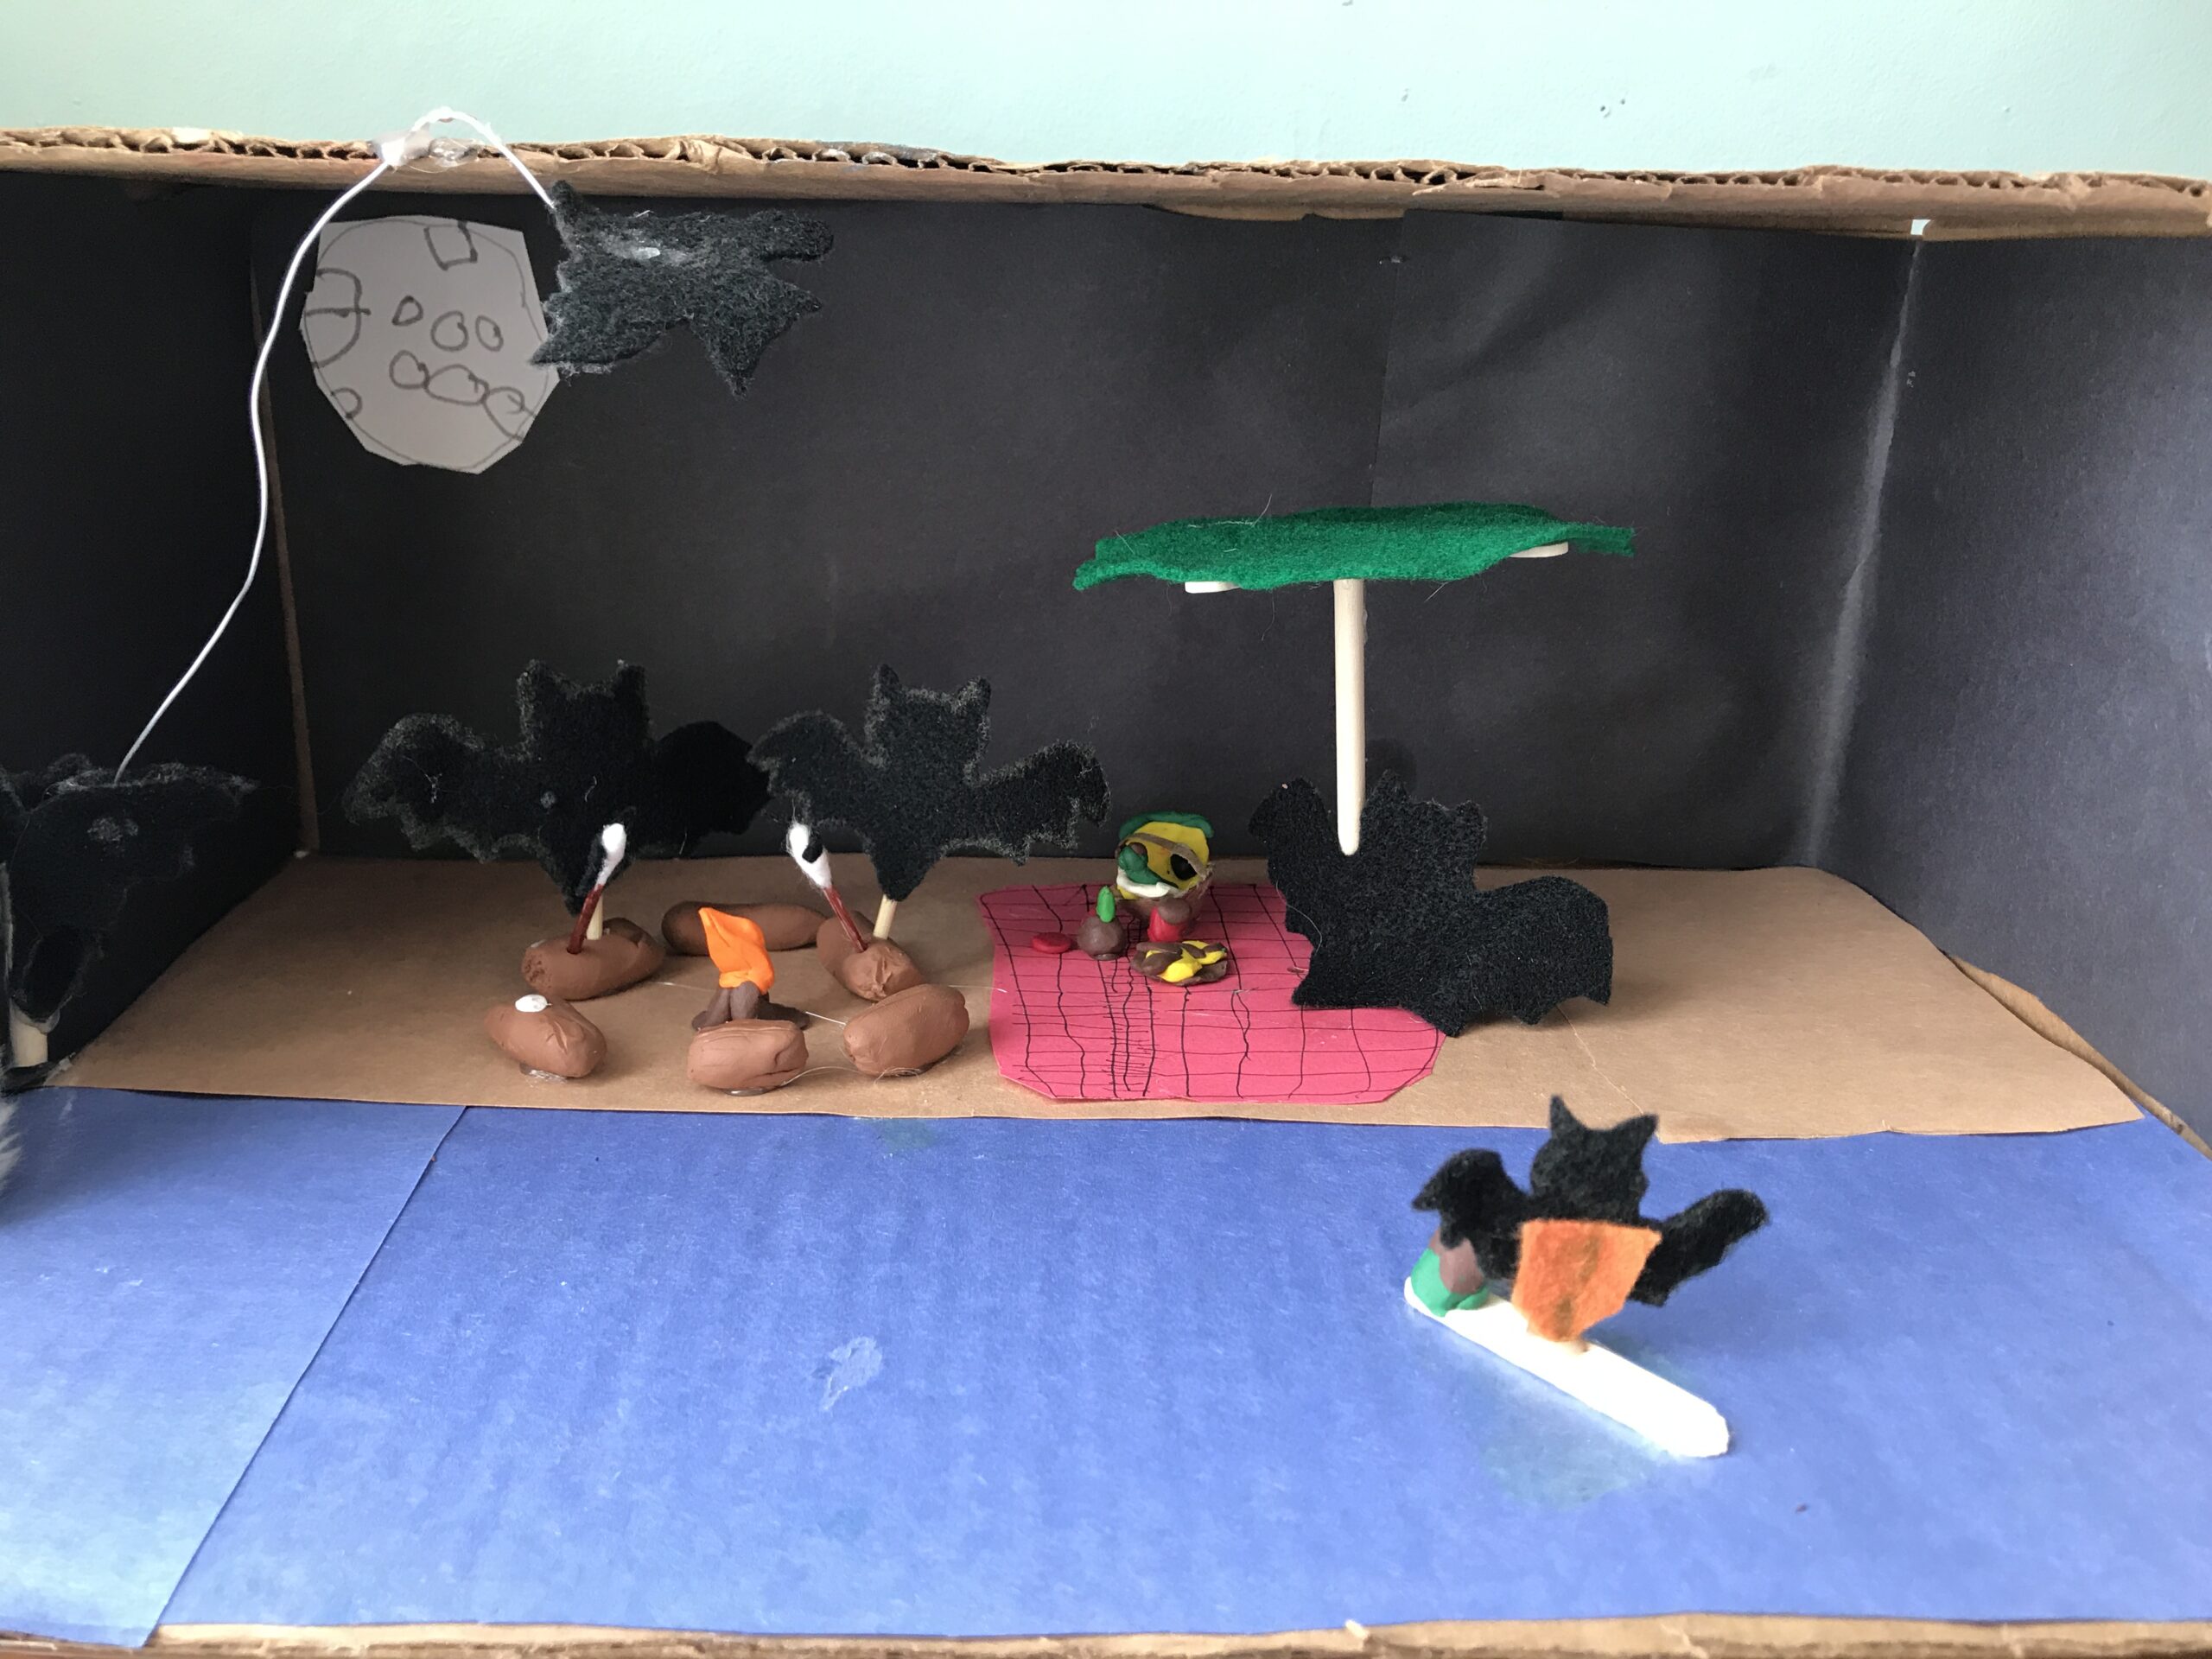 Millie's book report on "Bats at the Beach"